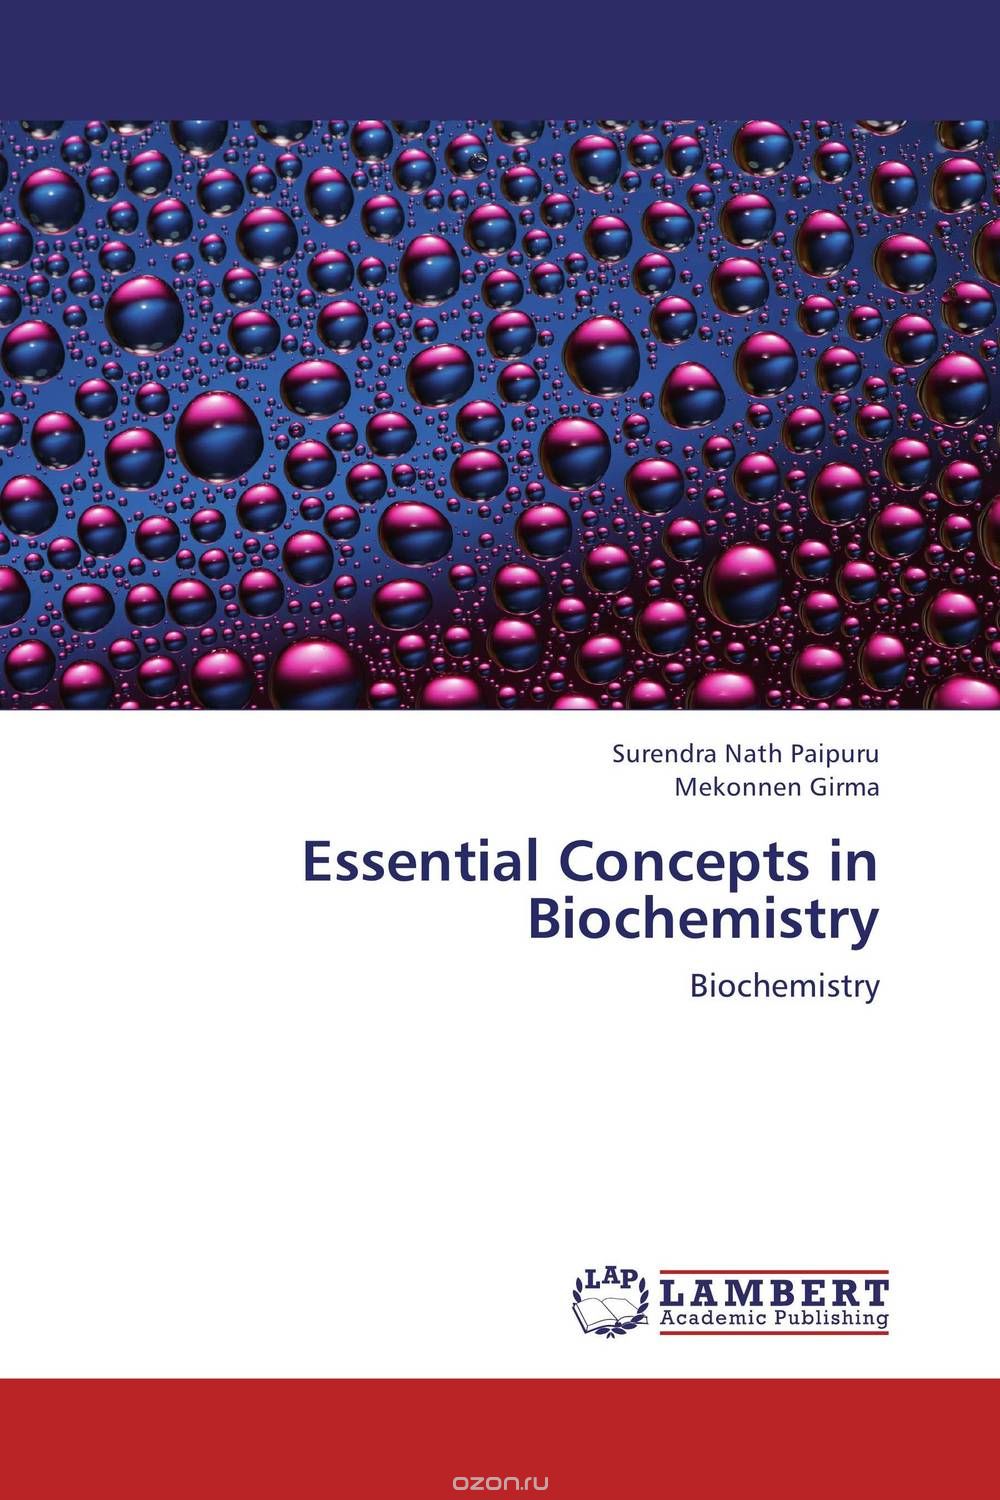 Essential Concepts in Biochemistry